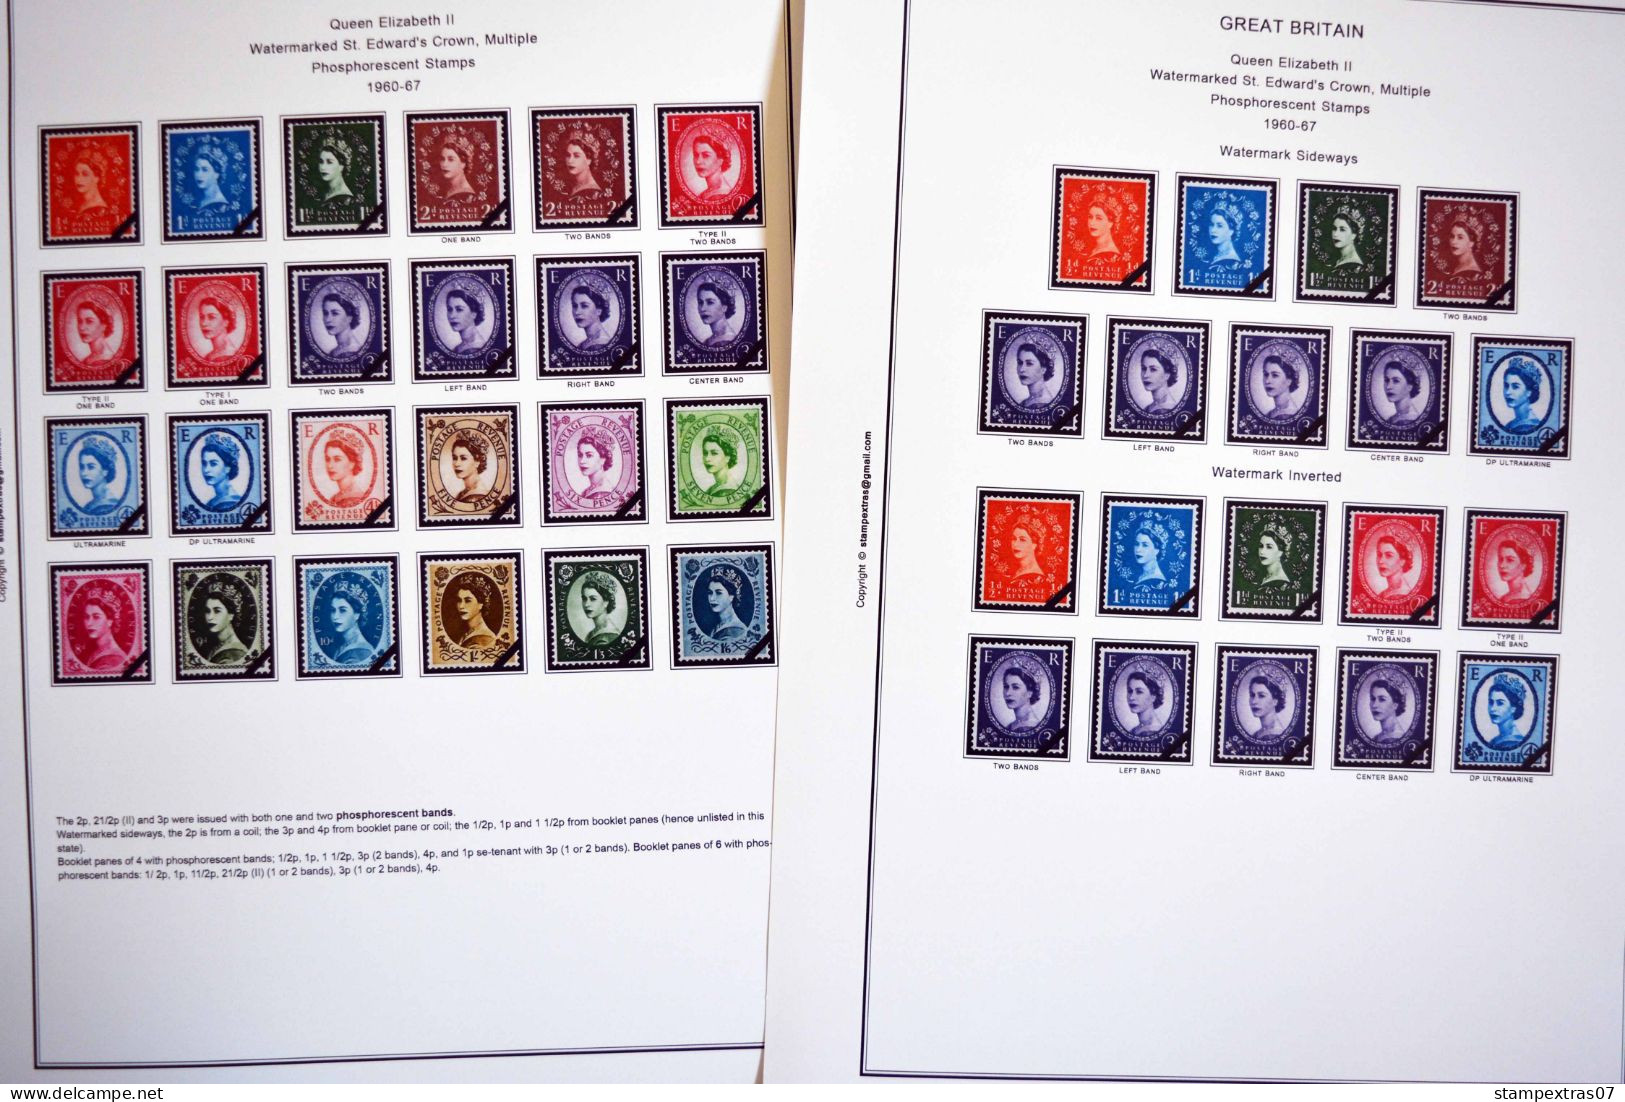 COLOR PRINTED GREAT BRITAIN WILDING ISSUES 1952-1967 STAMP ALBUM PAGES (10 illustrated pages) >> FEUILLES ALBUM